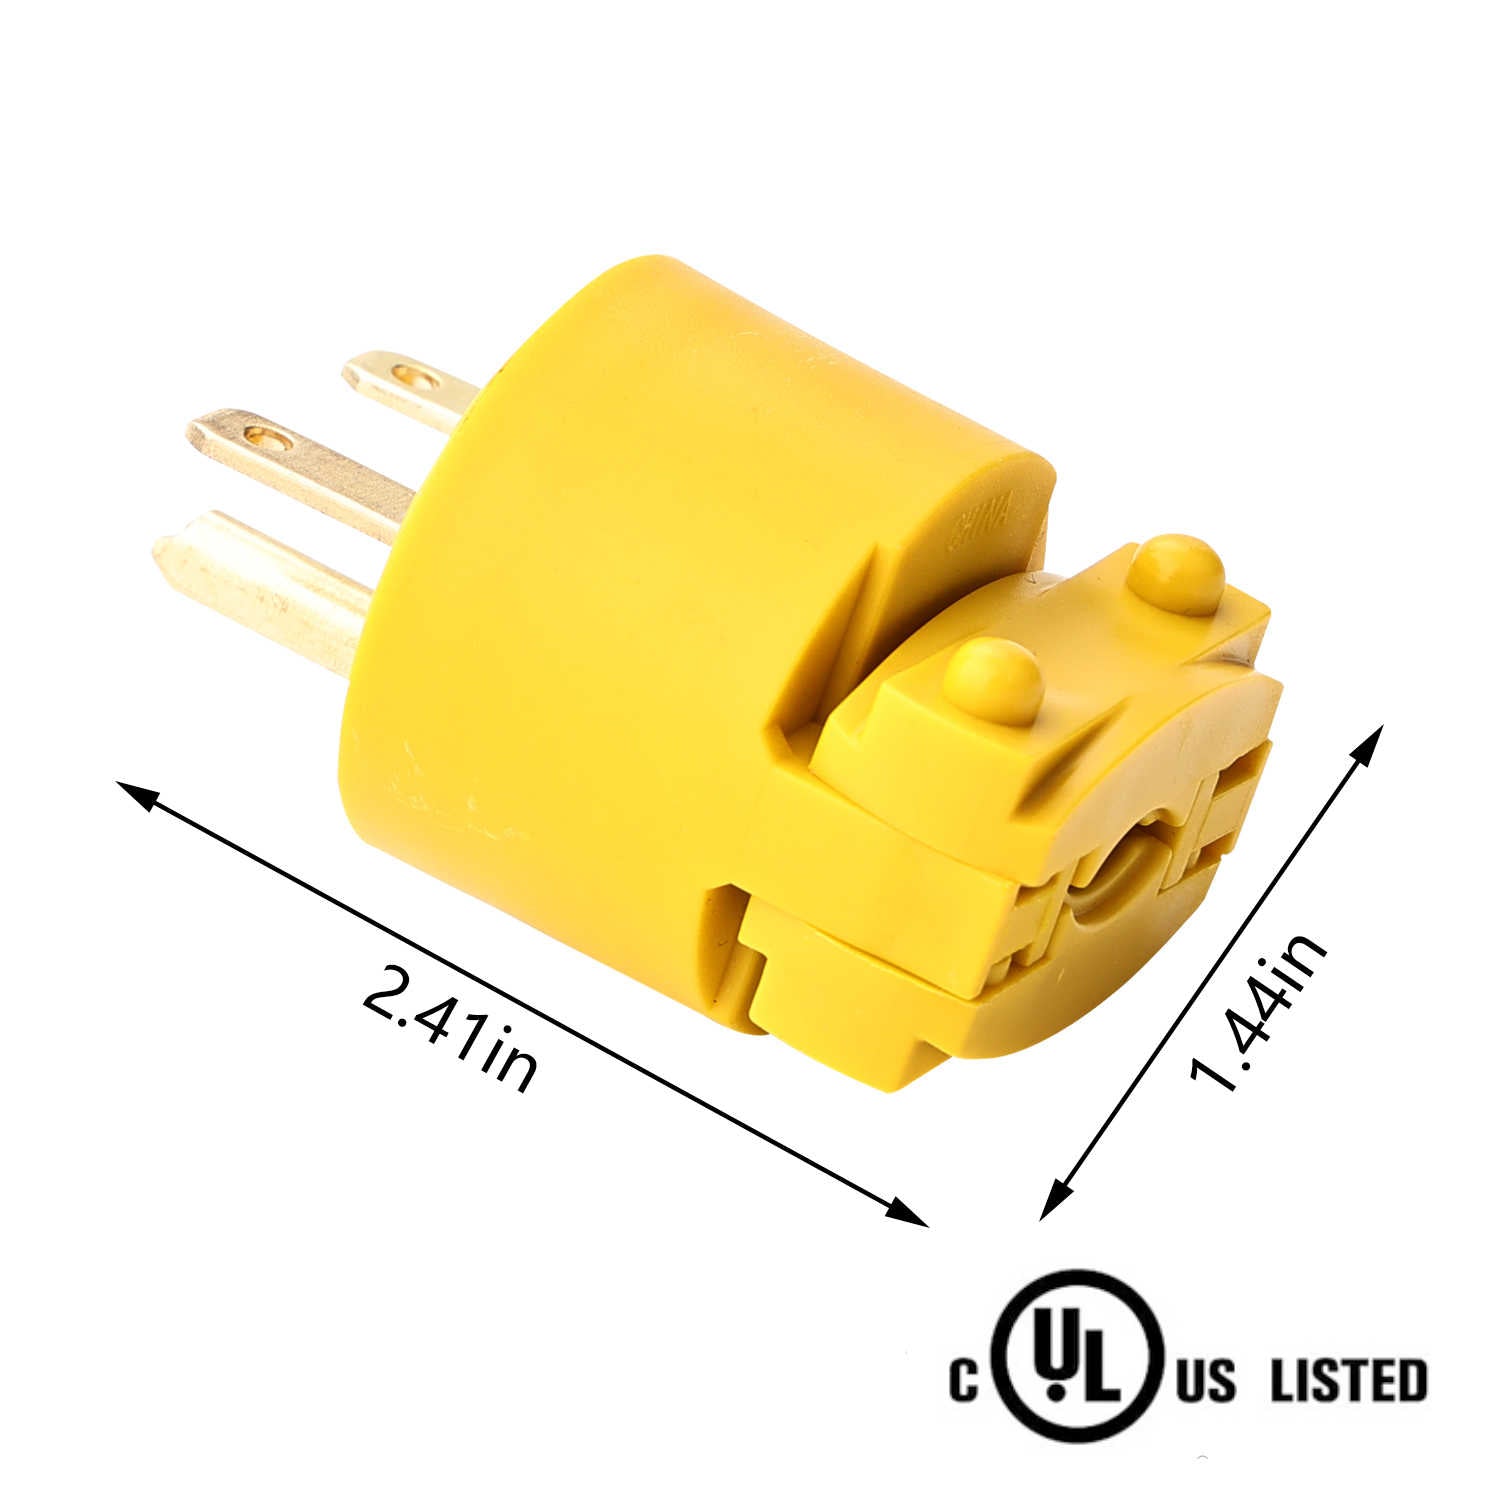 Electrical Plug Extension Cord End 125/250V 15/20A